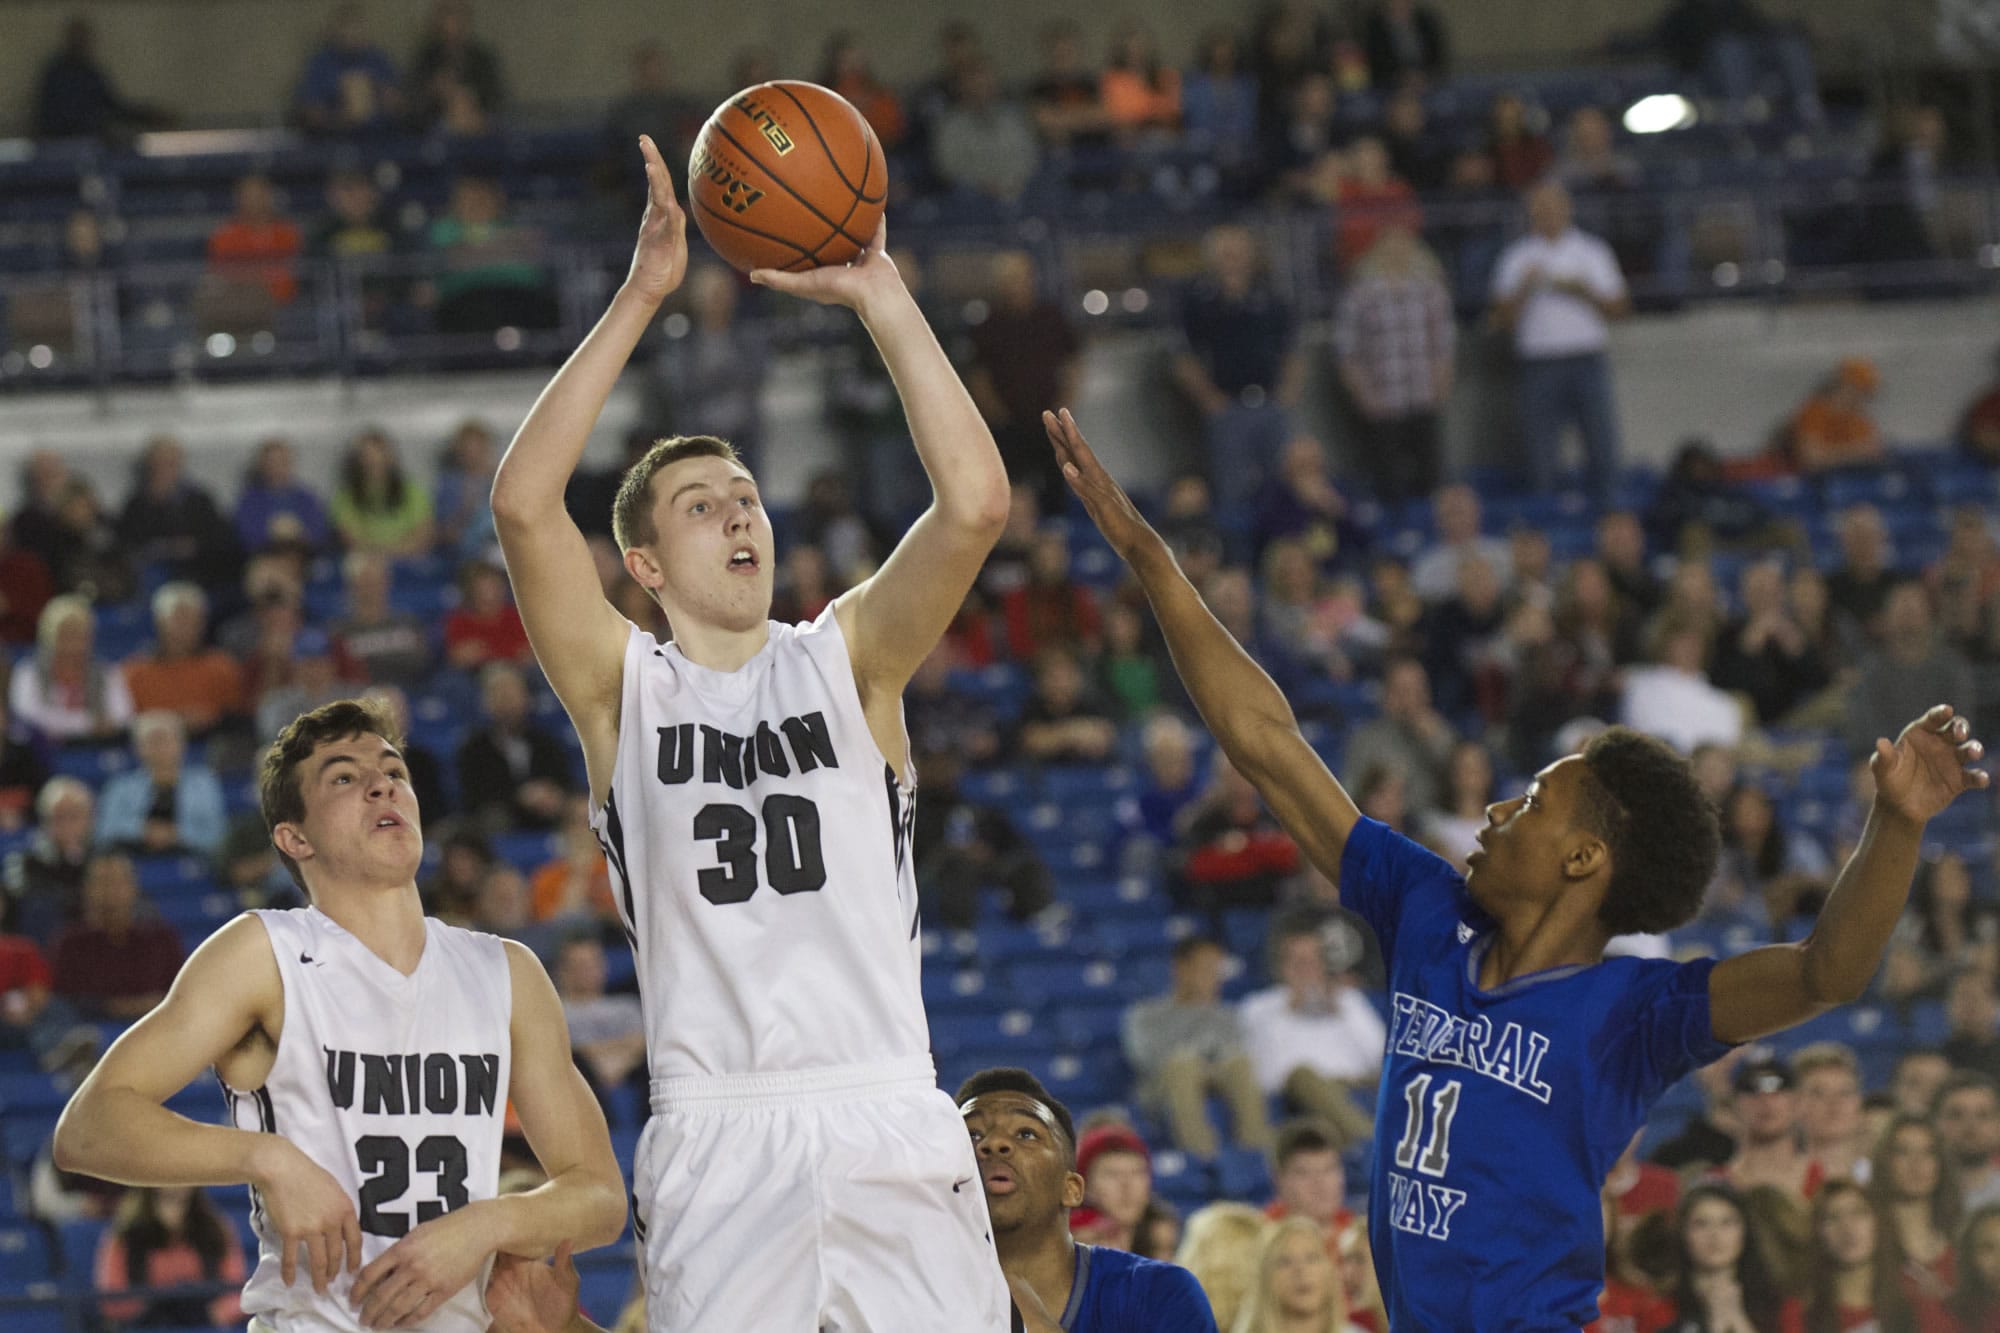 Cameron Cranston shoots a three as Union loses to Federal Way 61-58 at the 2015 WIAA Hardwood Classic 4A Boys tournament at the Tacoma Dome, Friday, March 6, 2015.